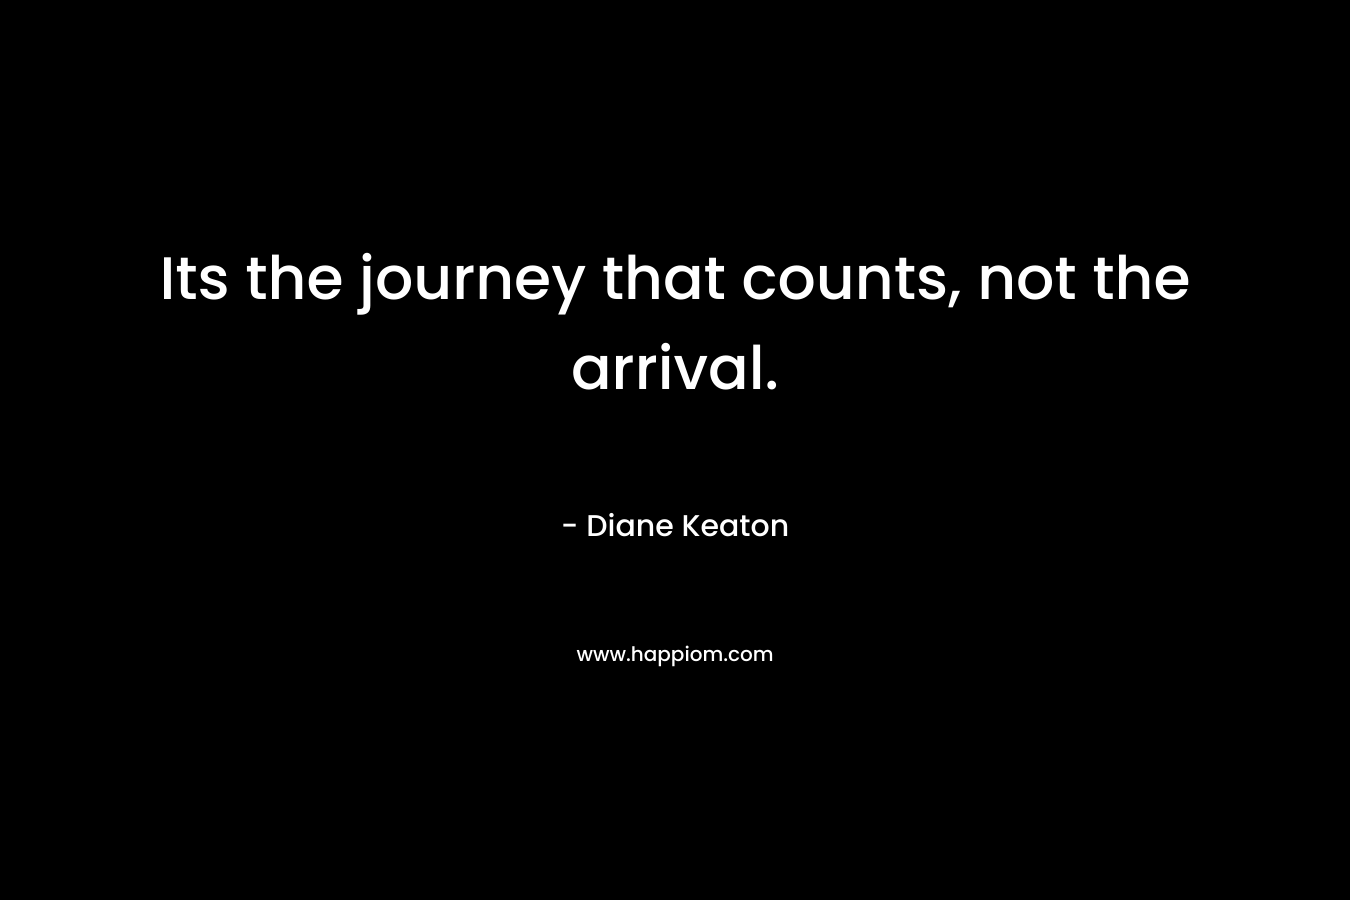 Its the journey that counts, not the arrival. – Diane Keaton